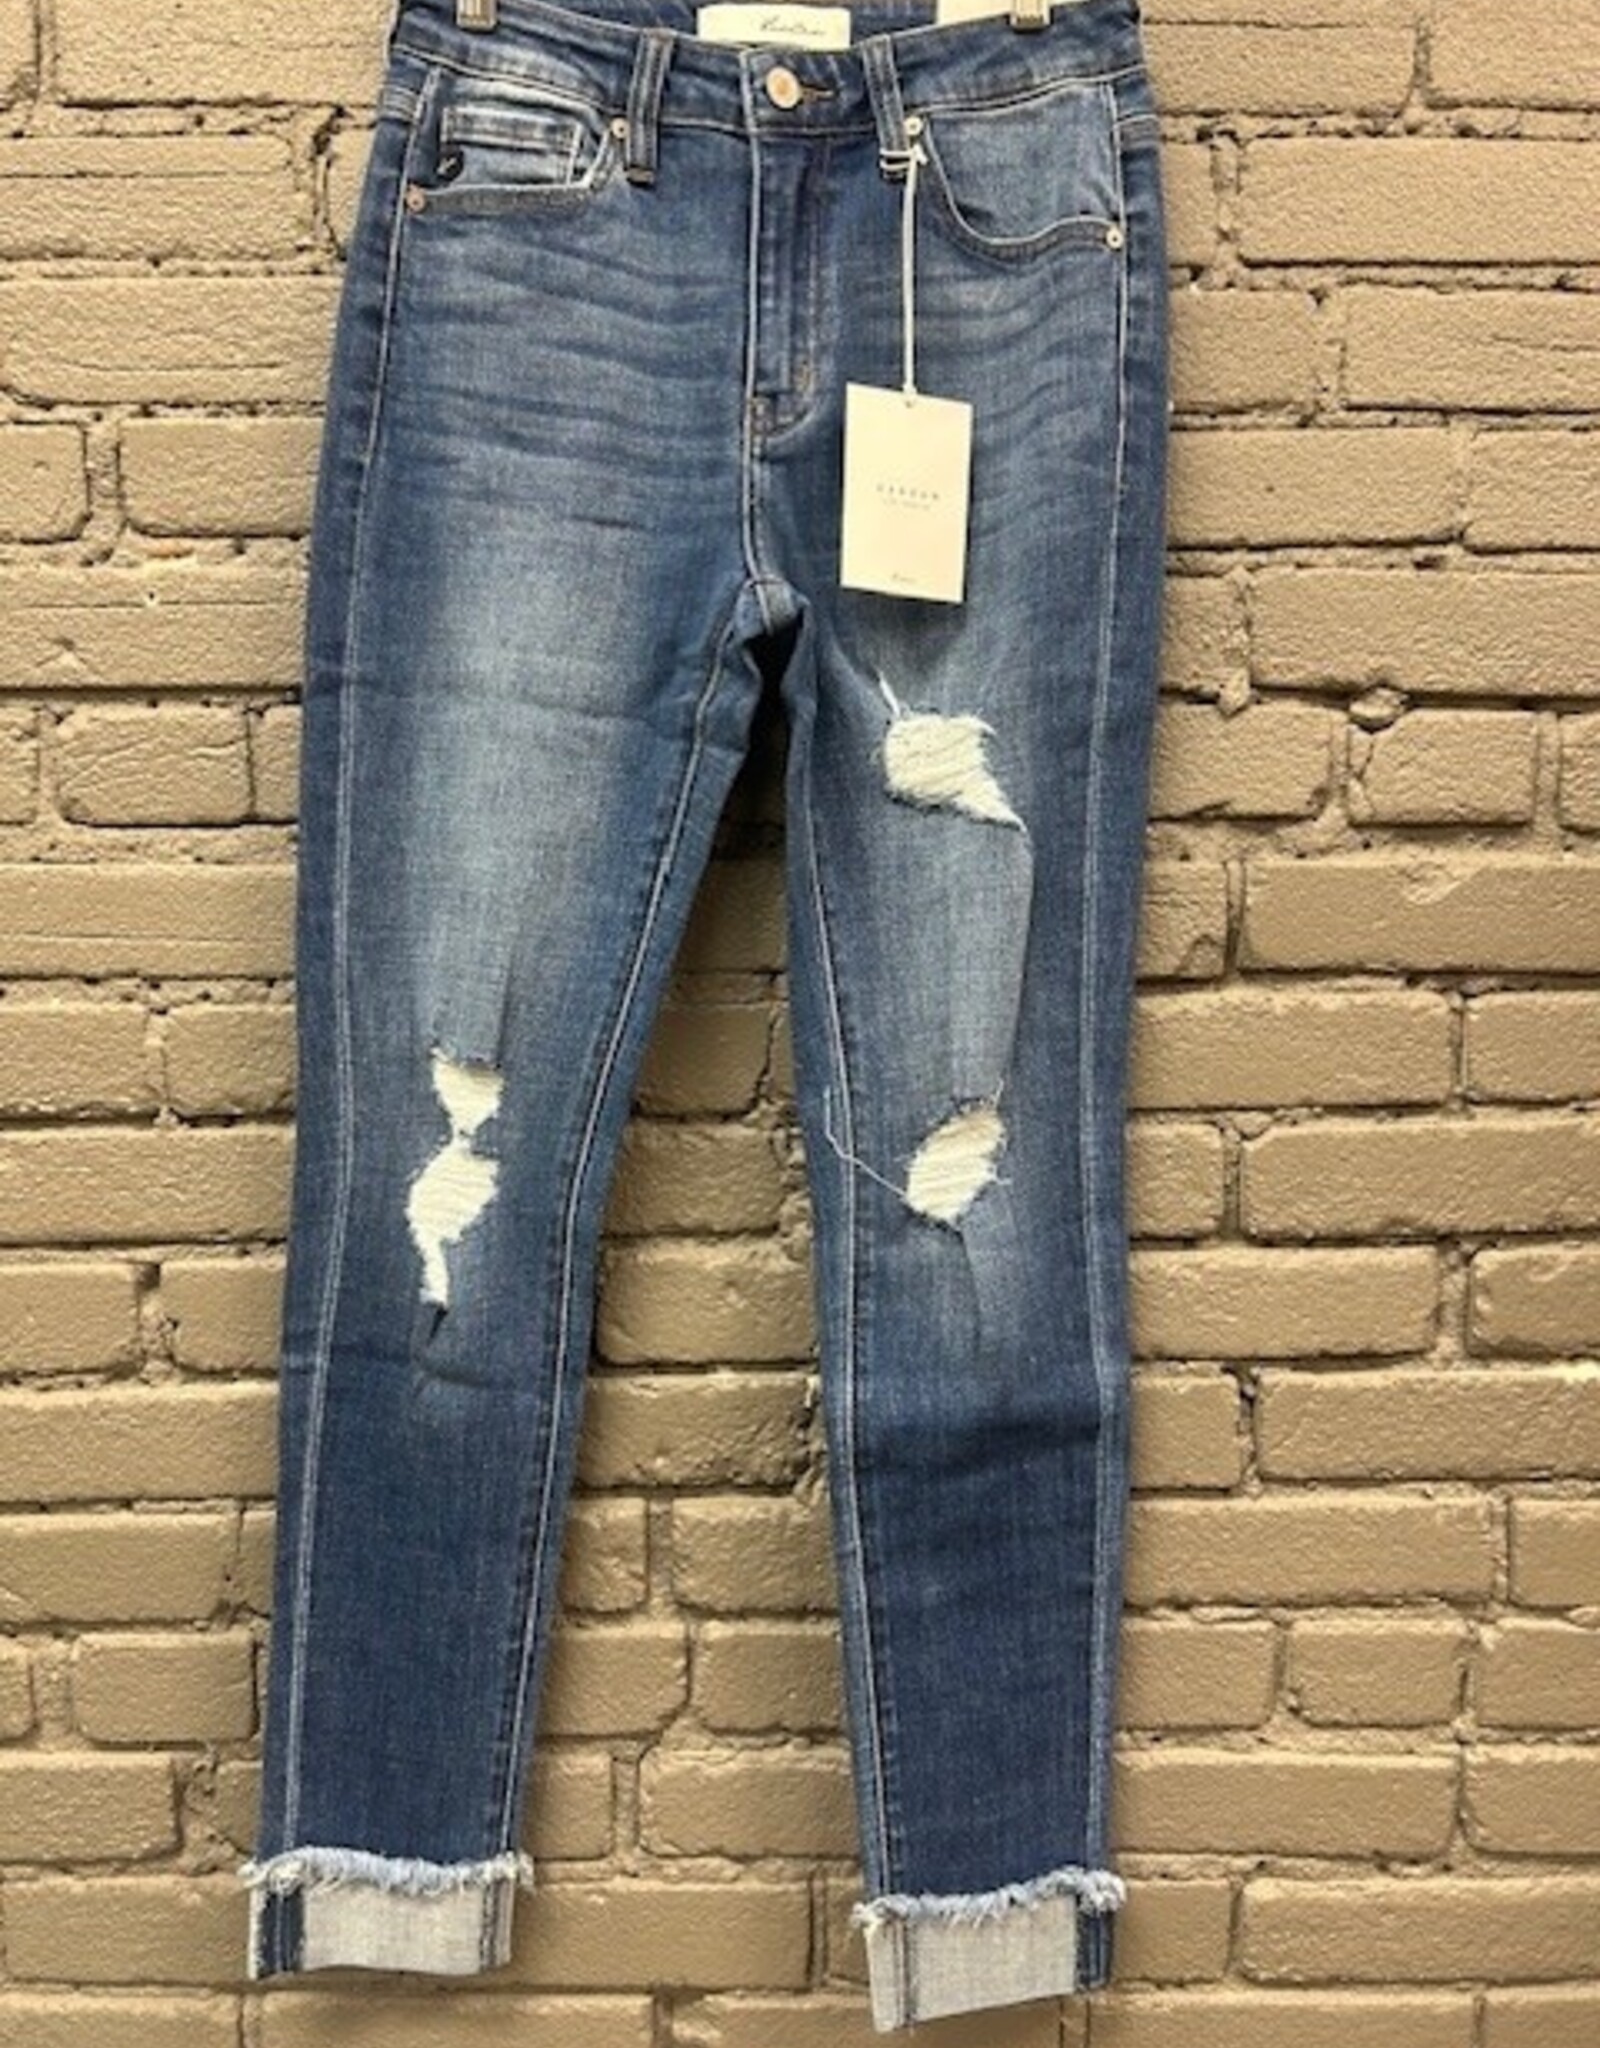 jeans Elvis High Rise Ankle Skinny Jeans